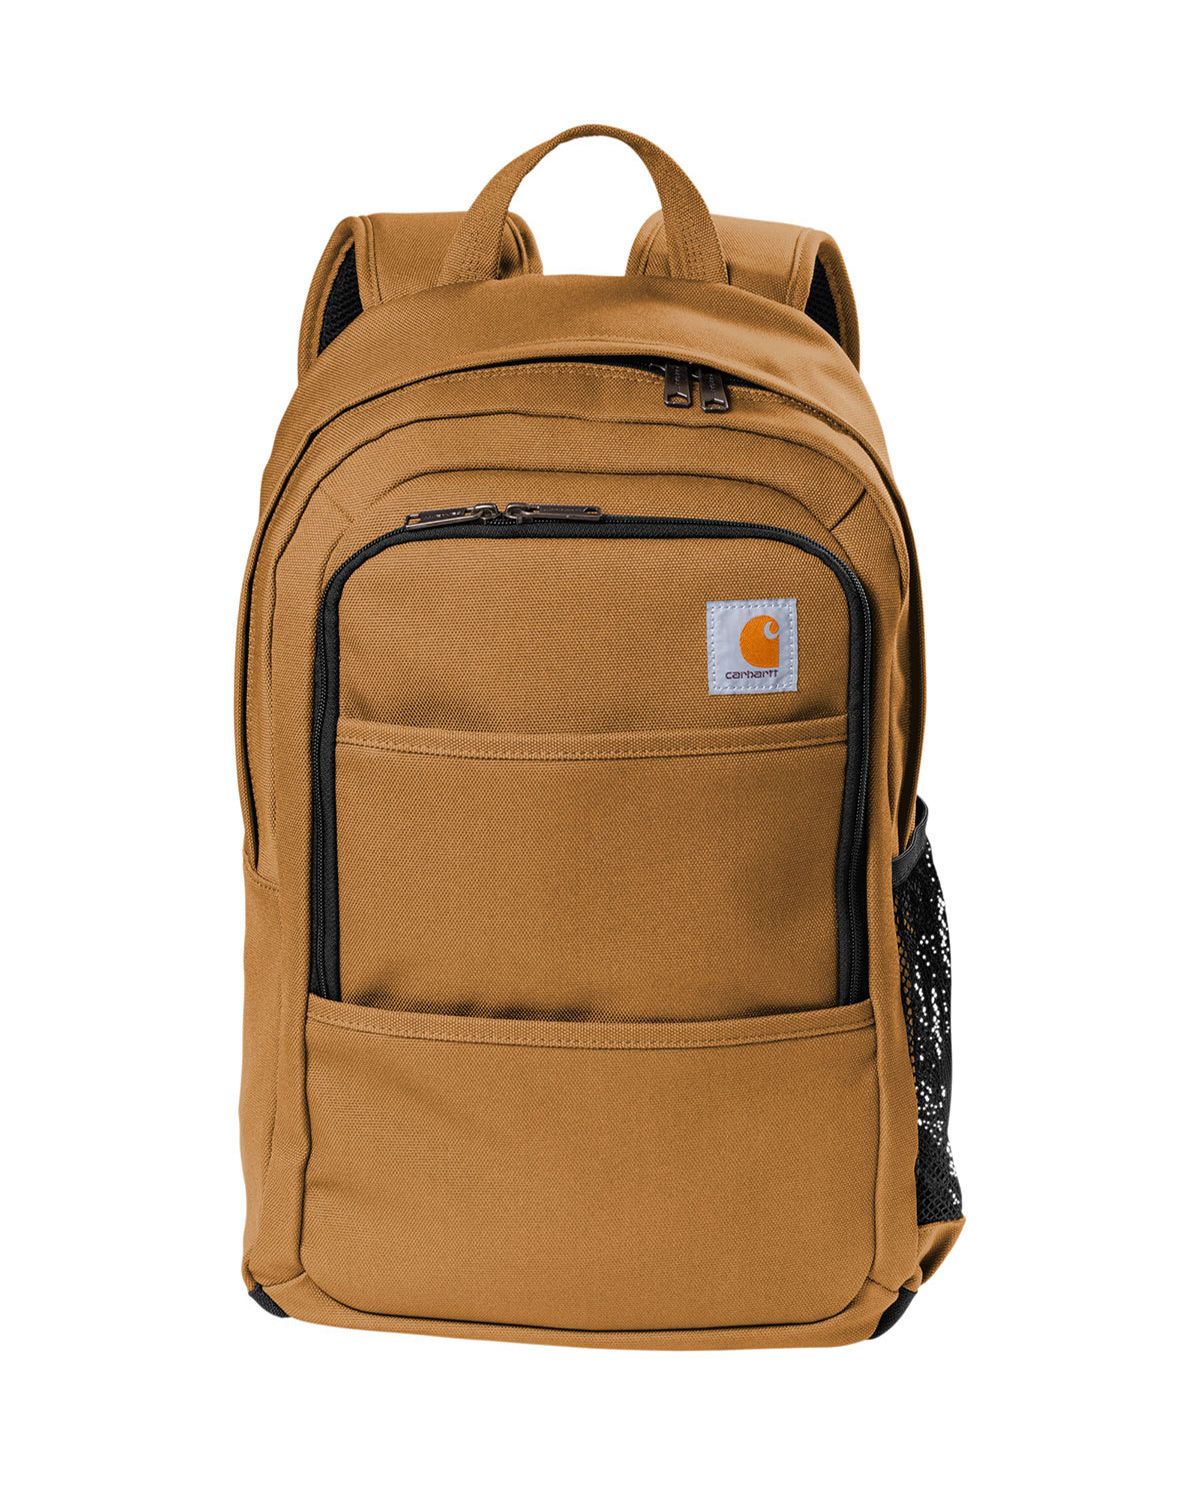 Carhartt CT89350303 Foundry Series Backpack.